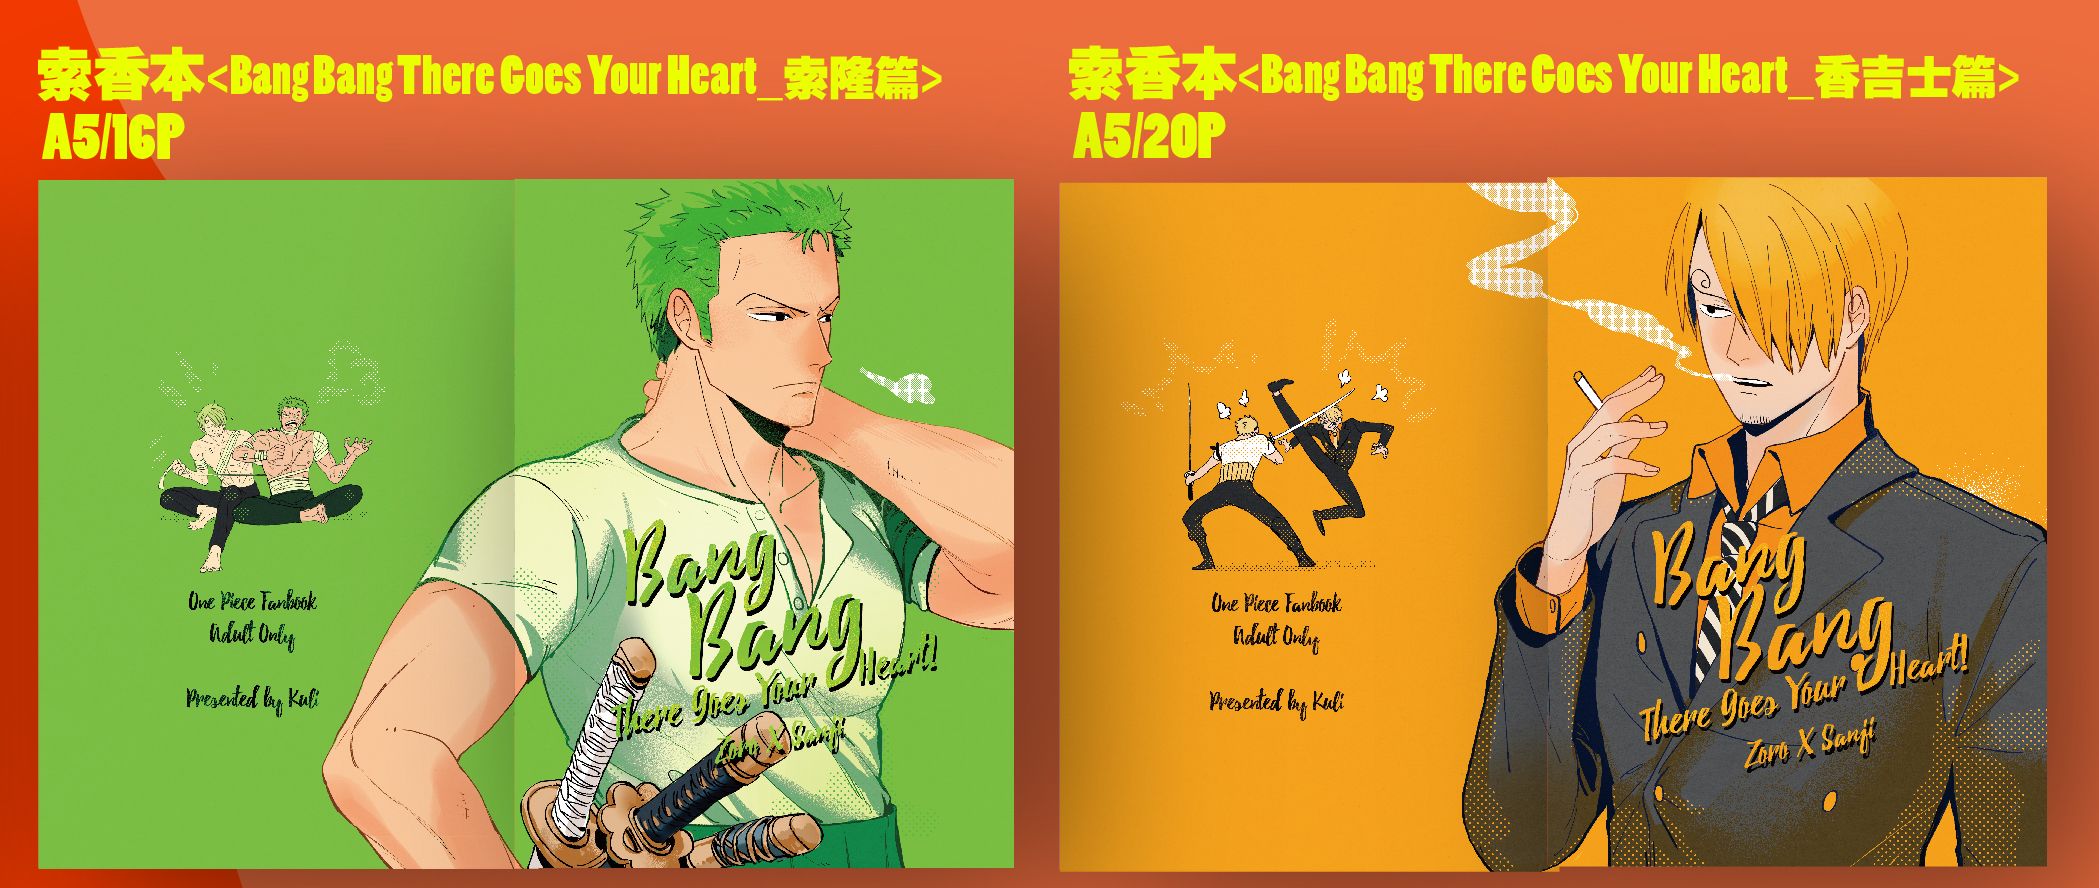 CWT66索香新刊_Bang Bang There Goes Your Heart